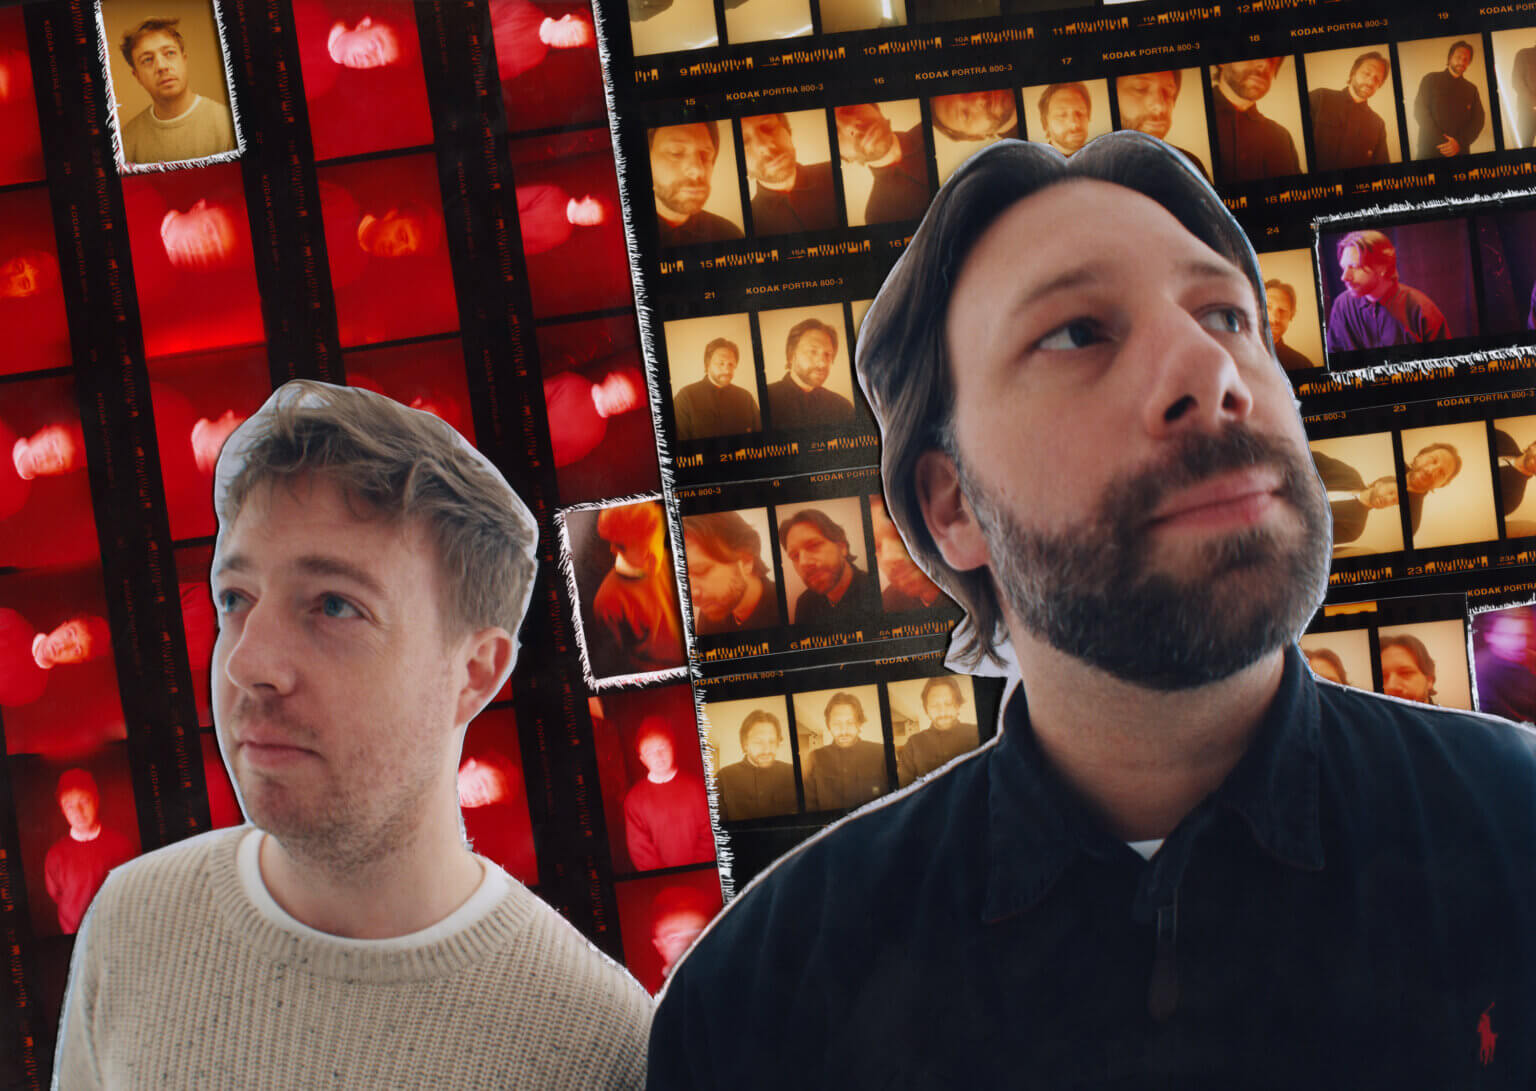 UK duo Mount Kimbie have release brand new double AA-side singles titled MK 3.5: “in your eyes (feat. slowthai and Danny Brown)"